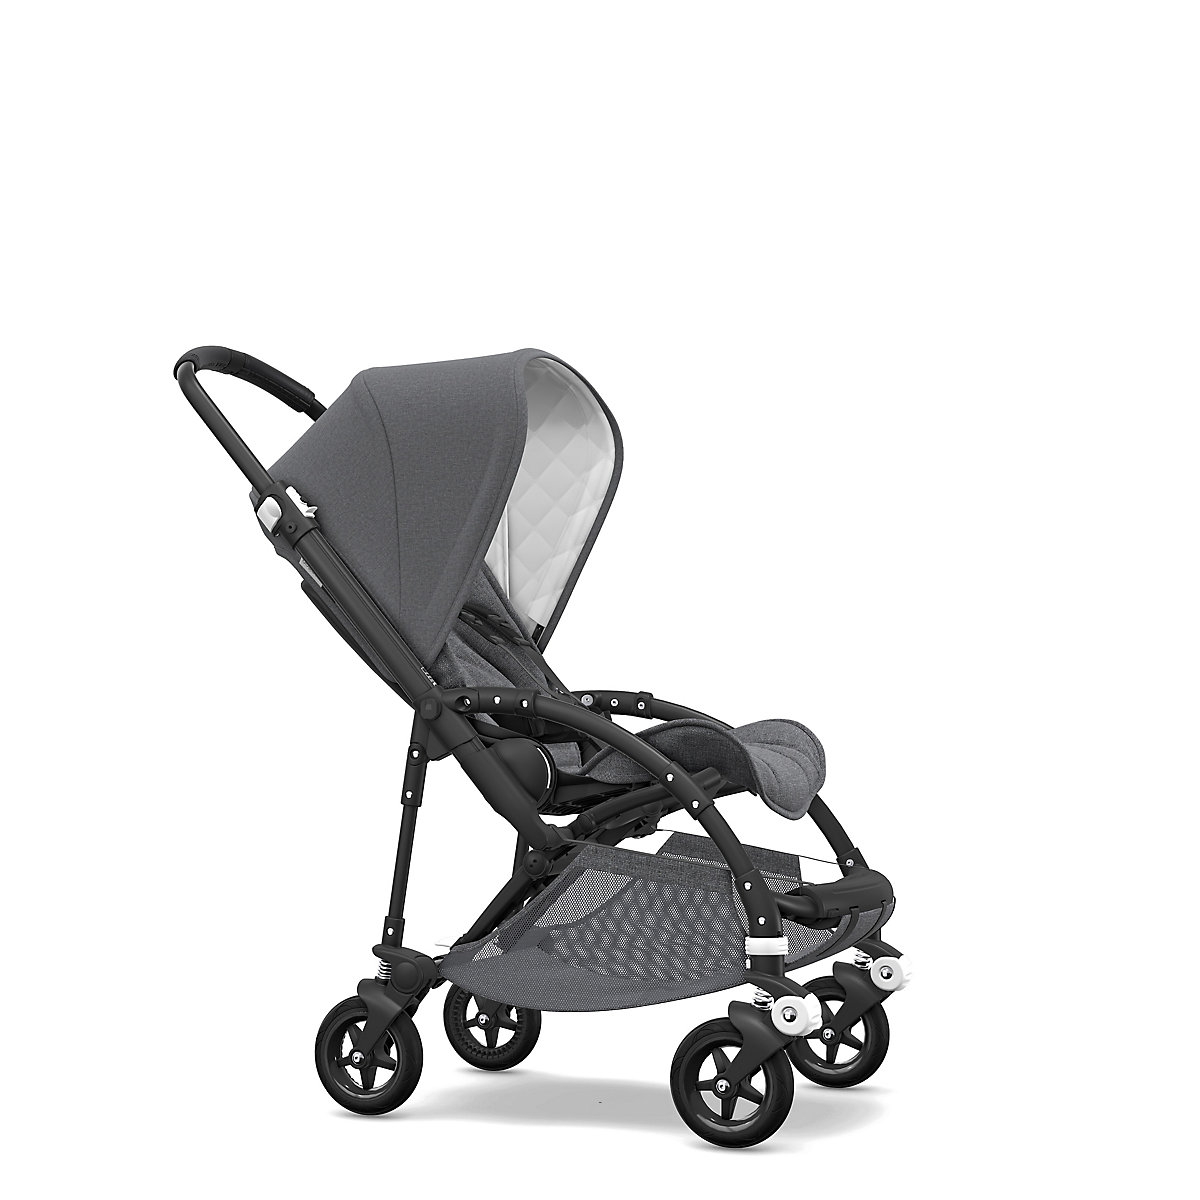 Bugaboo bee5 classic complete pram and pushchair – grey melange